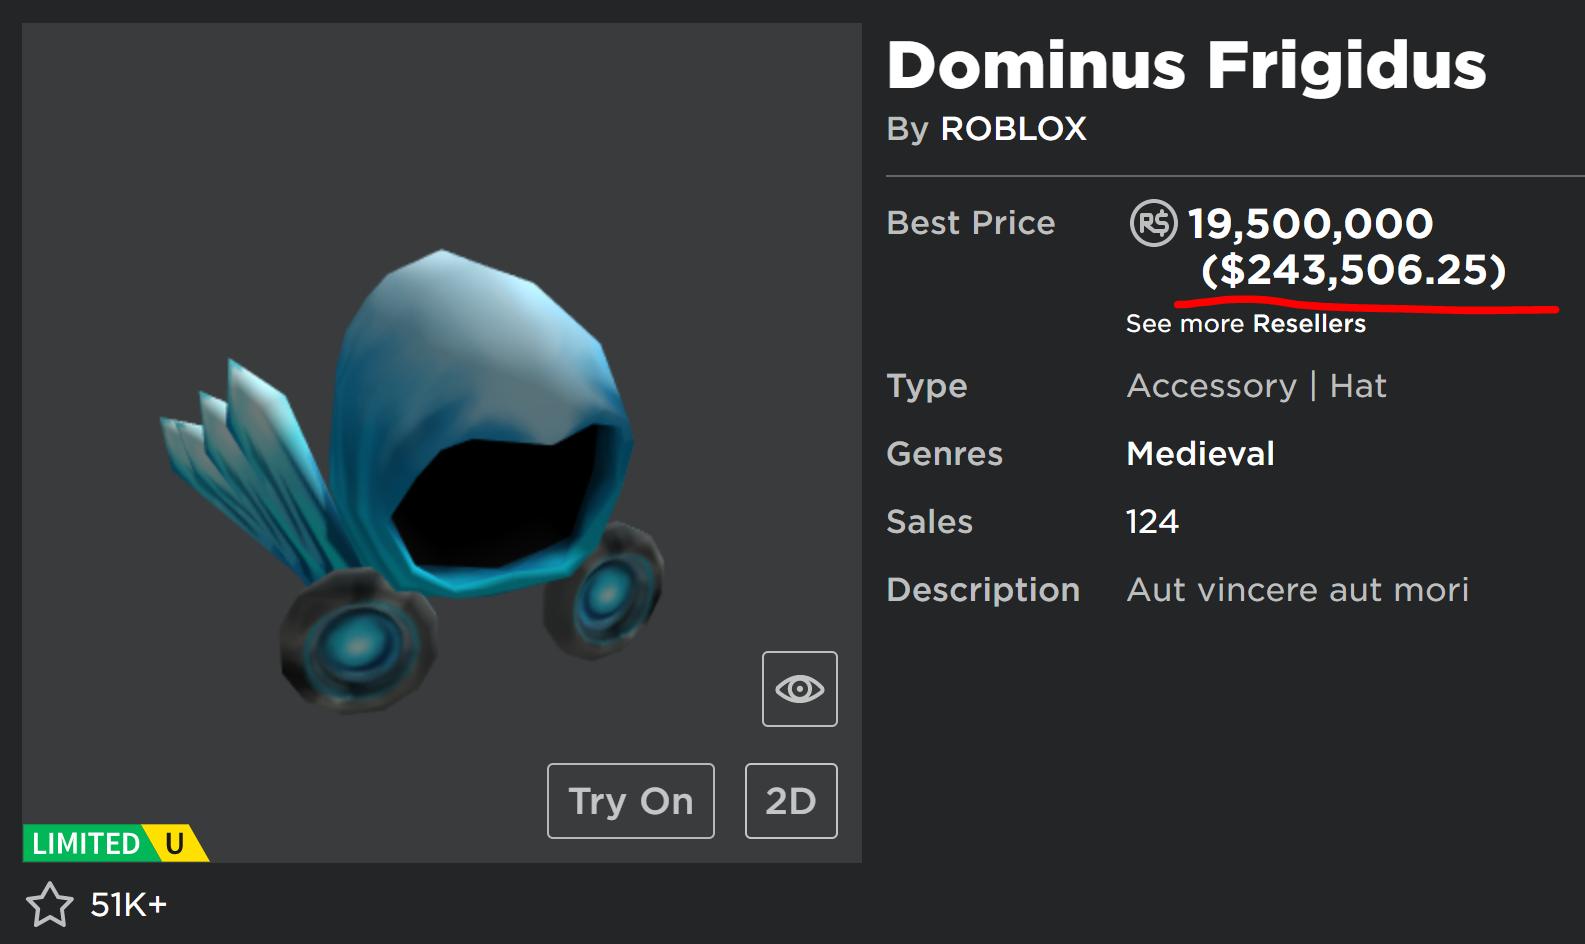 How much does a Dominus cost in Roblox? - Quora